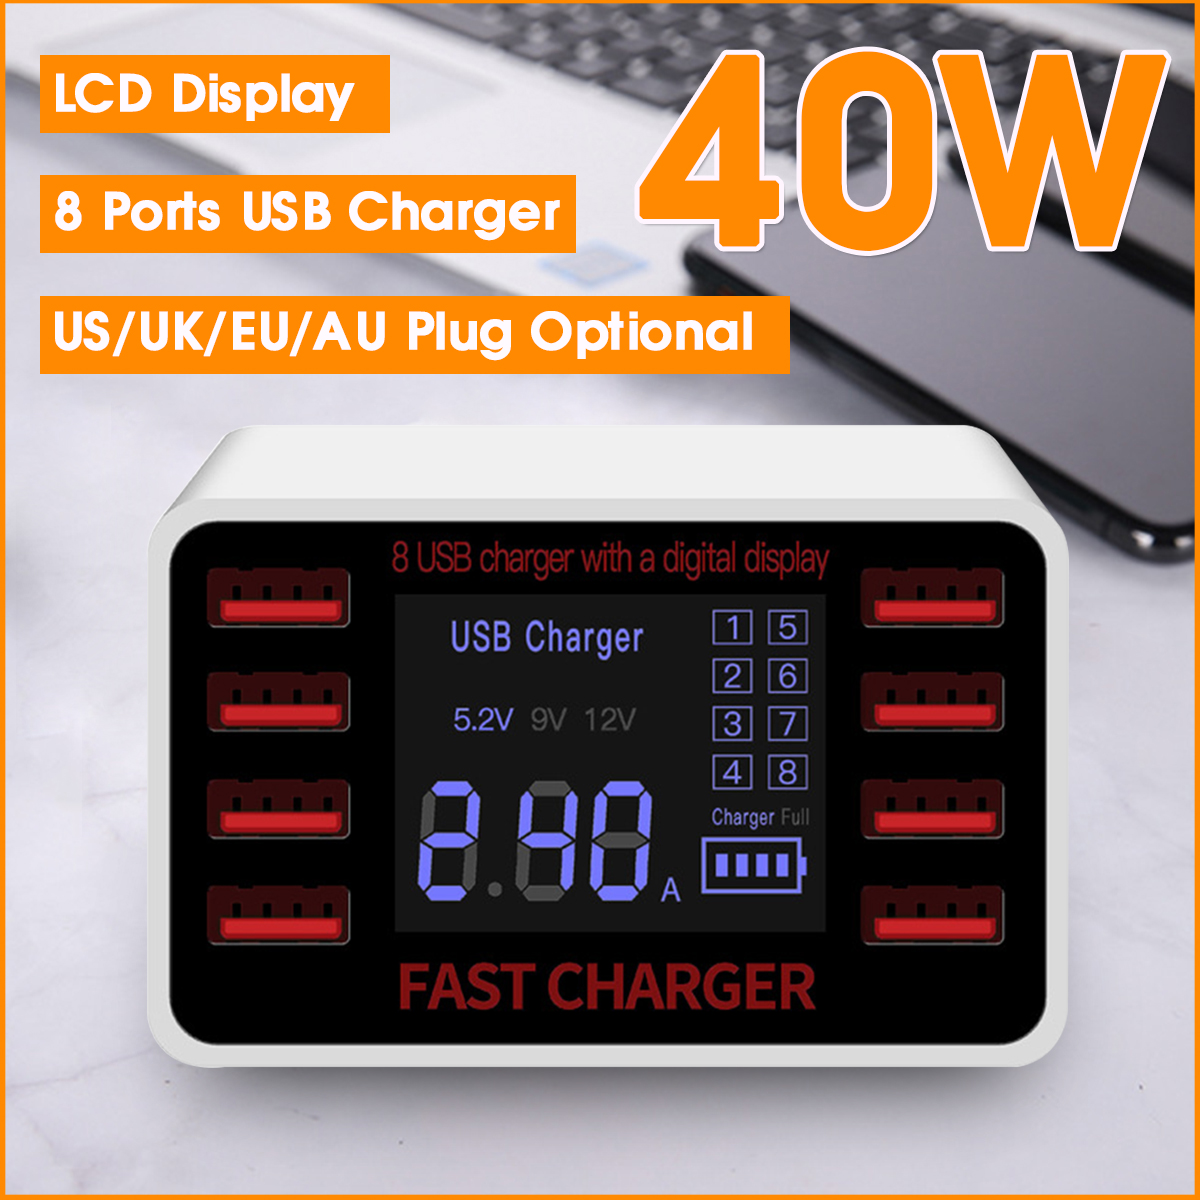 40W-Smart-8-Port-USB-Adapter-Desktop-Phone-Charging-LCD-Display-Fast-Charger-1584186-1